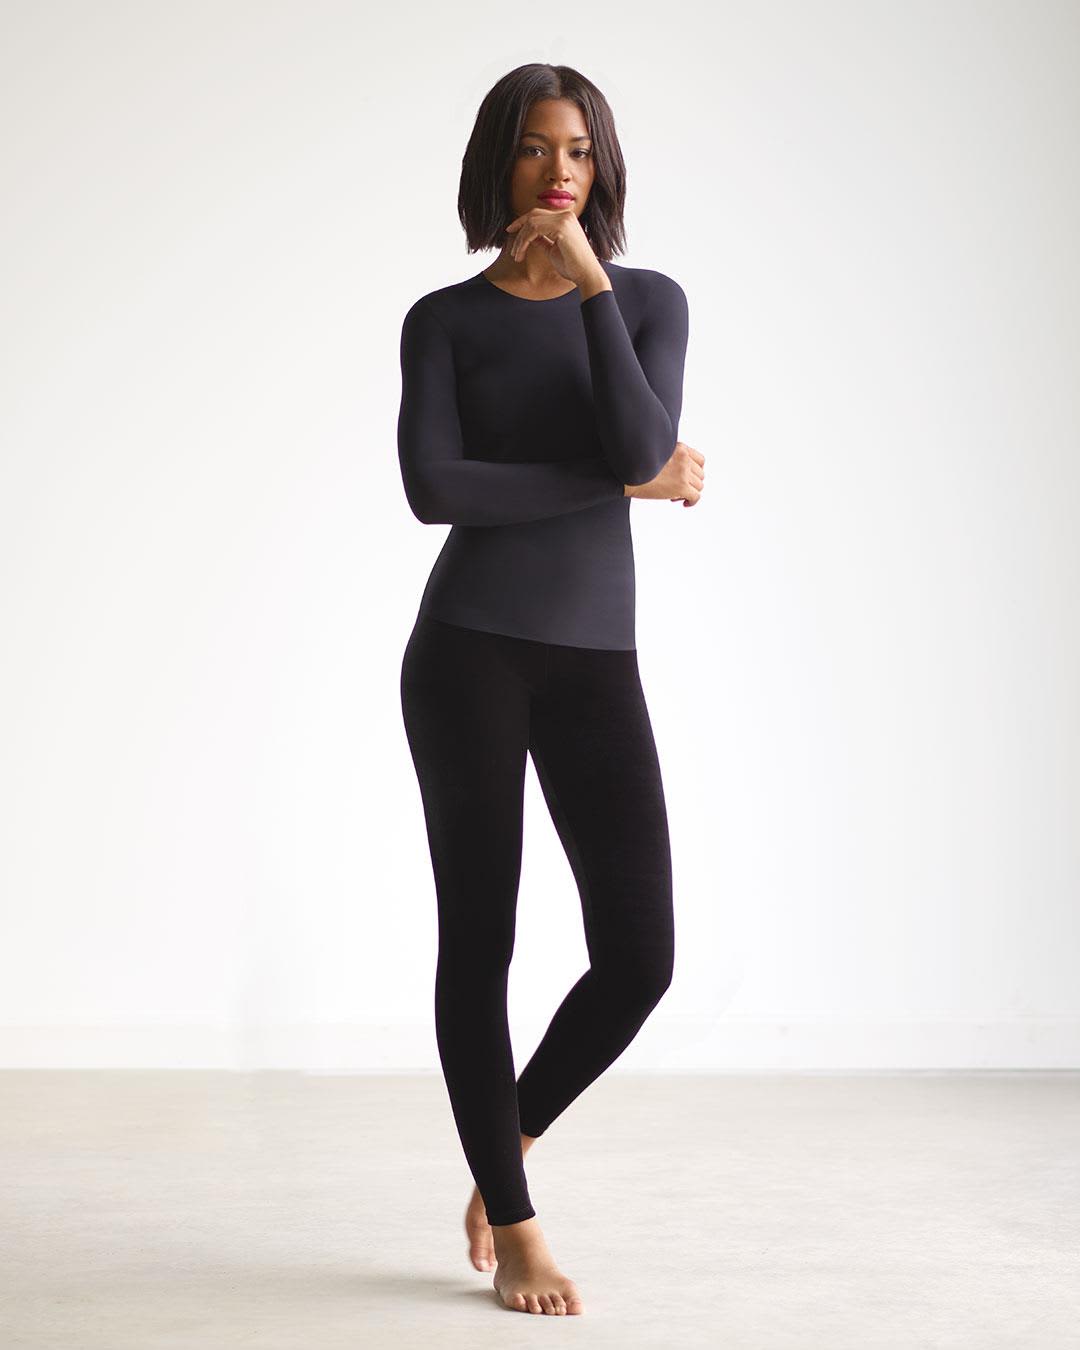 Commando's Comfy Compression Leggings Are Kendall Jenner-Approved